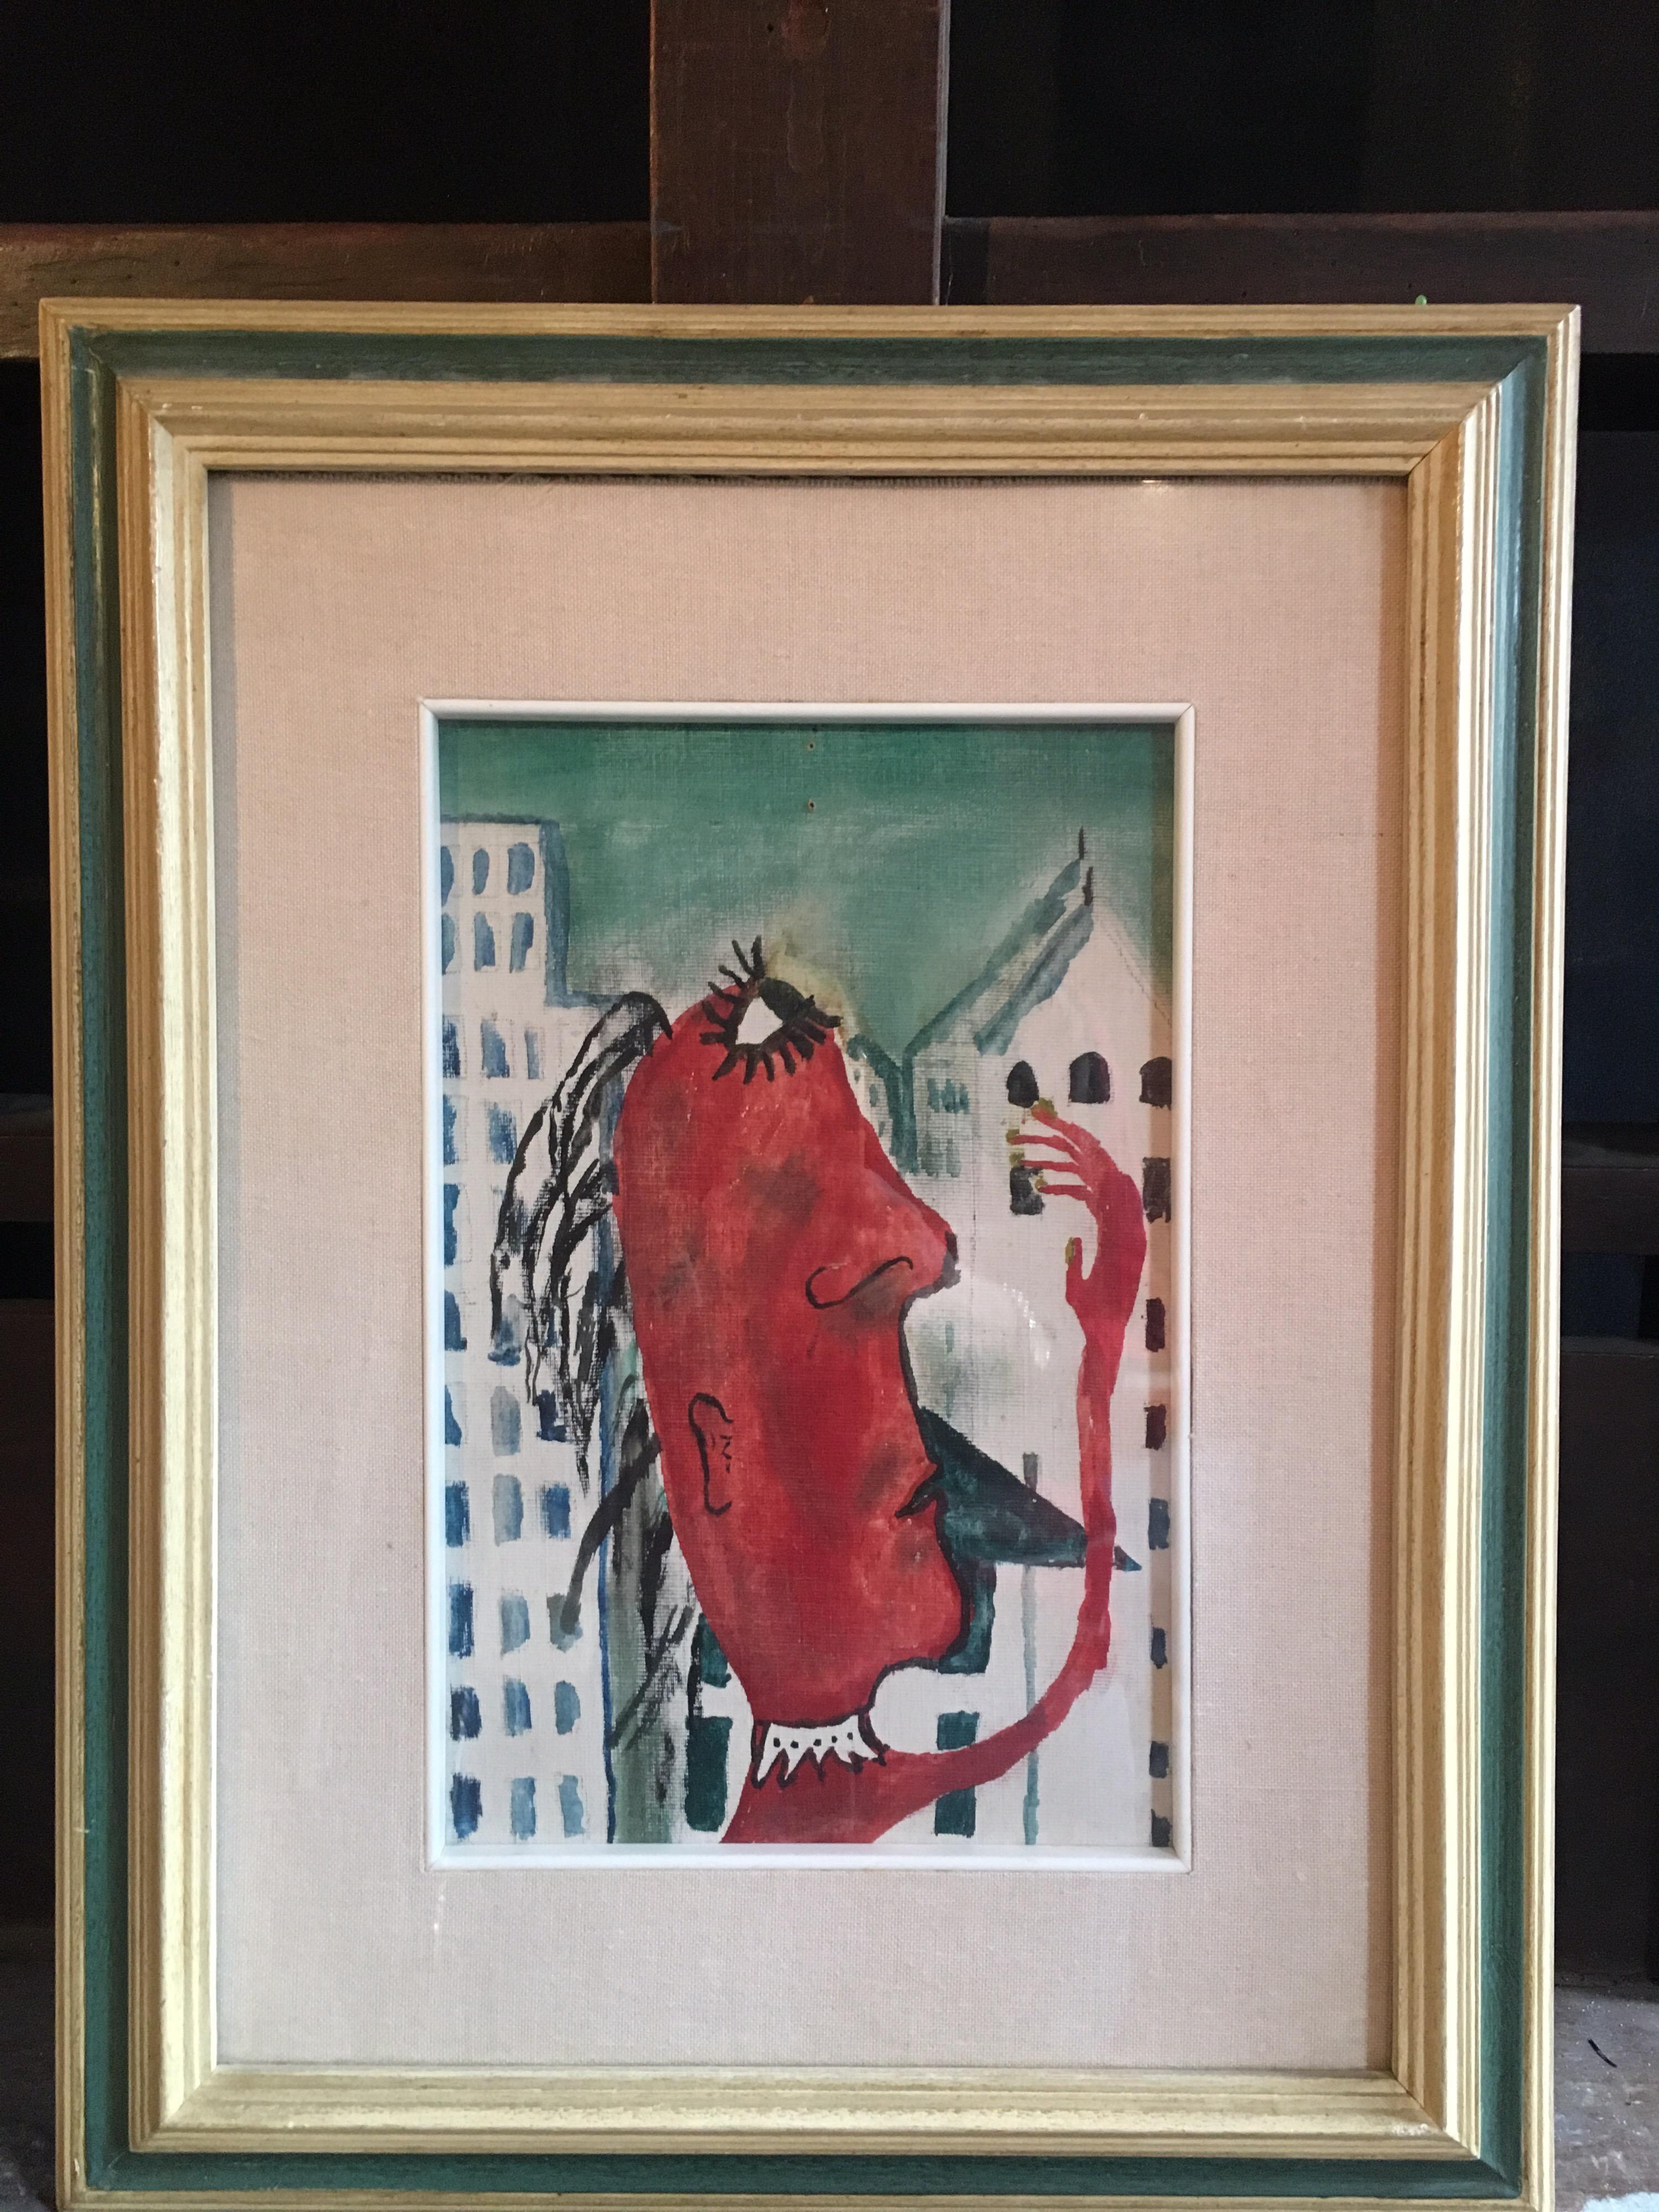 Abstract Portrait, Red Colour, Stylised, Glazed Frame
By European schooled artist, Late 20th Century
Gouache and Ink on canvas
Framed size: 14.5 x 16 inches

Wonderfully unusual portrait of a lone figure, painted in a highly stylised and fashionable